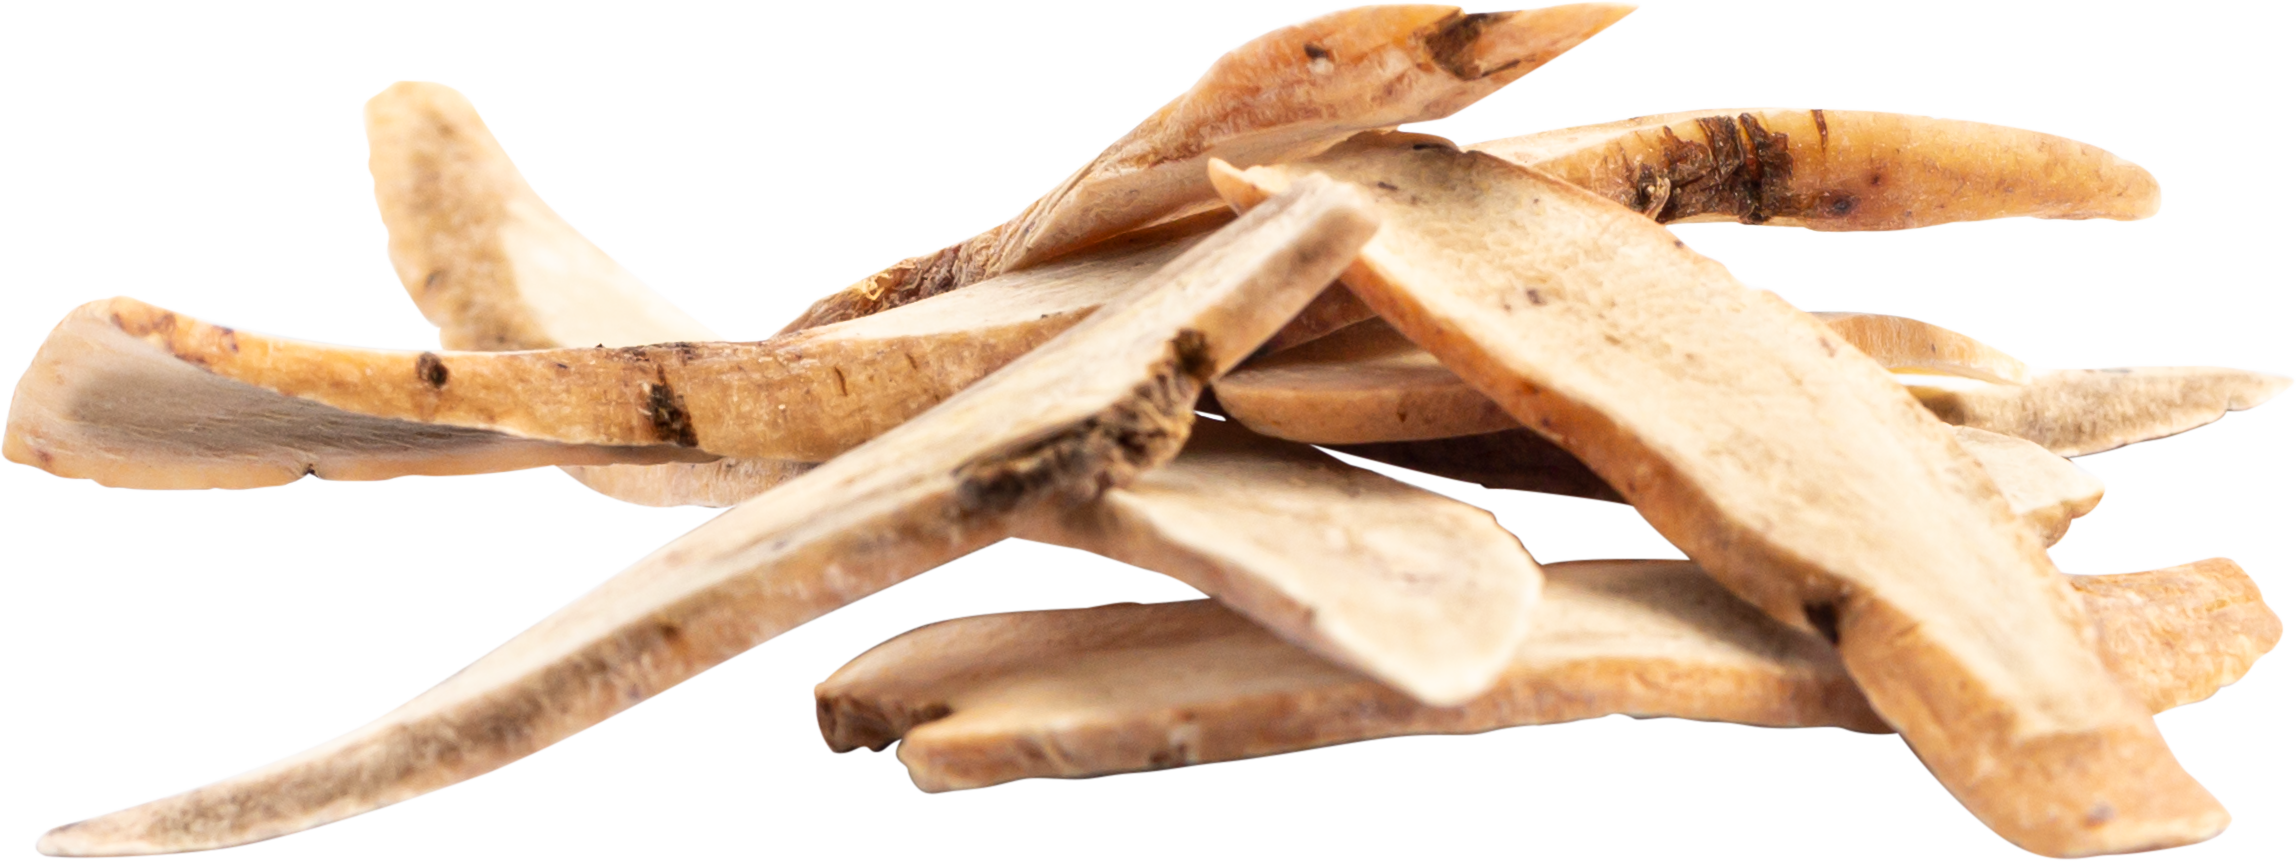 white peony root for menstrual cycle nourishment